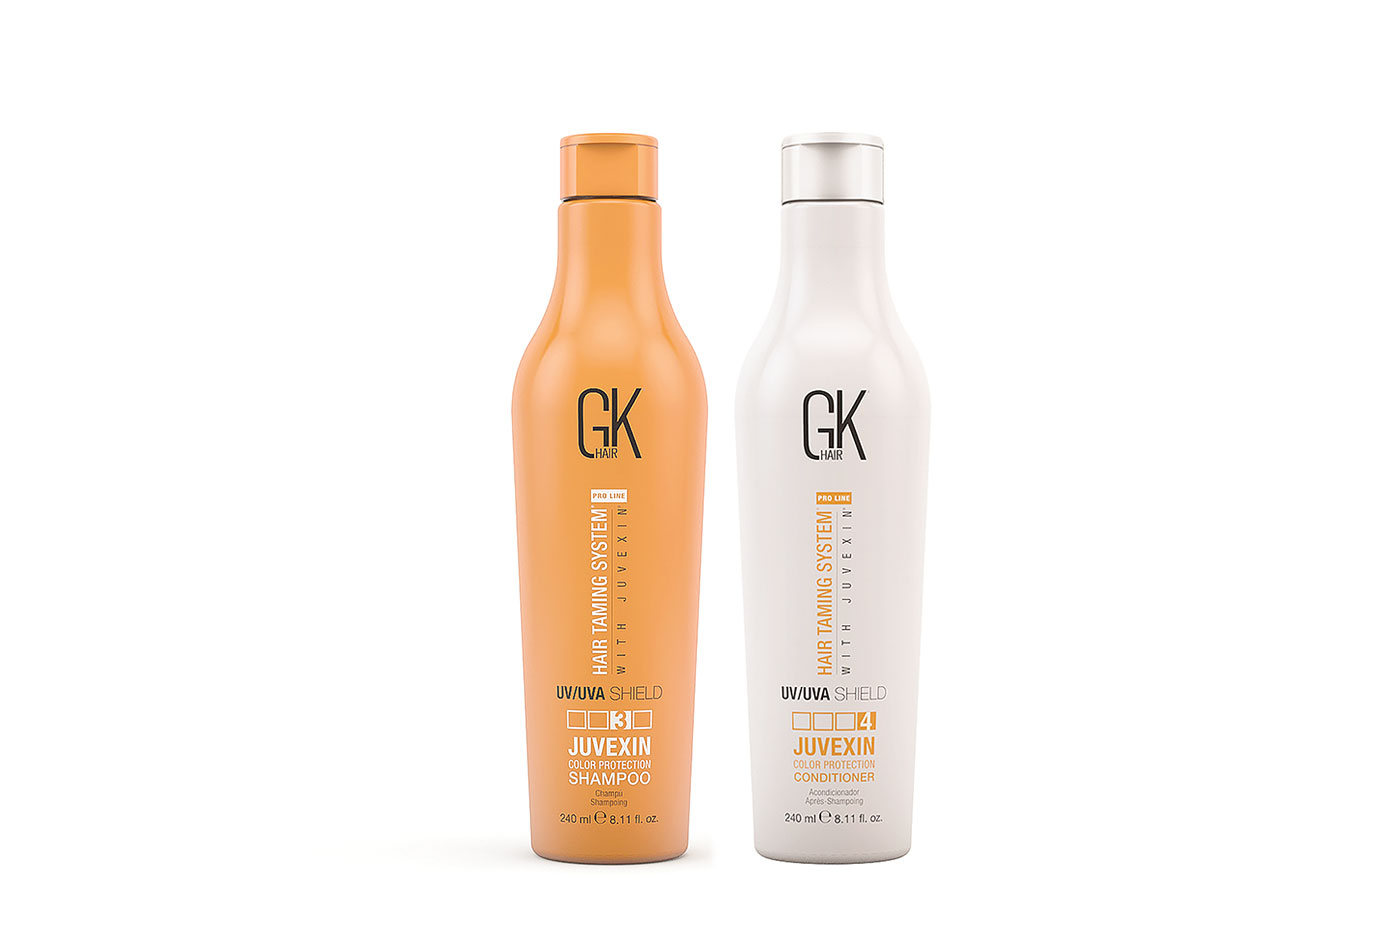 GK Hair’s Color Shield shampoo & conditioner for protection from UV/UVA rays